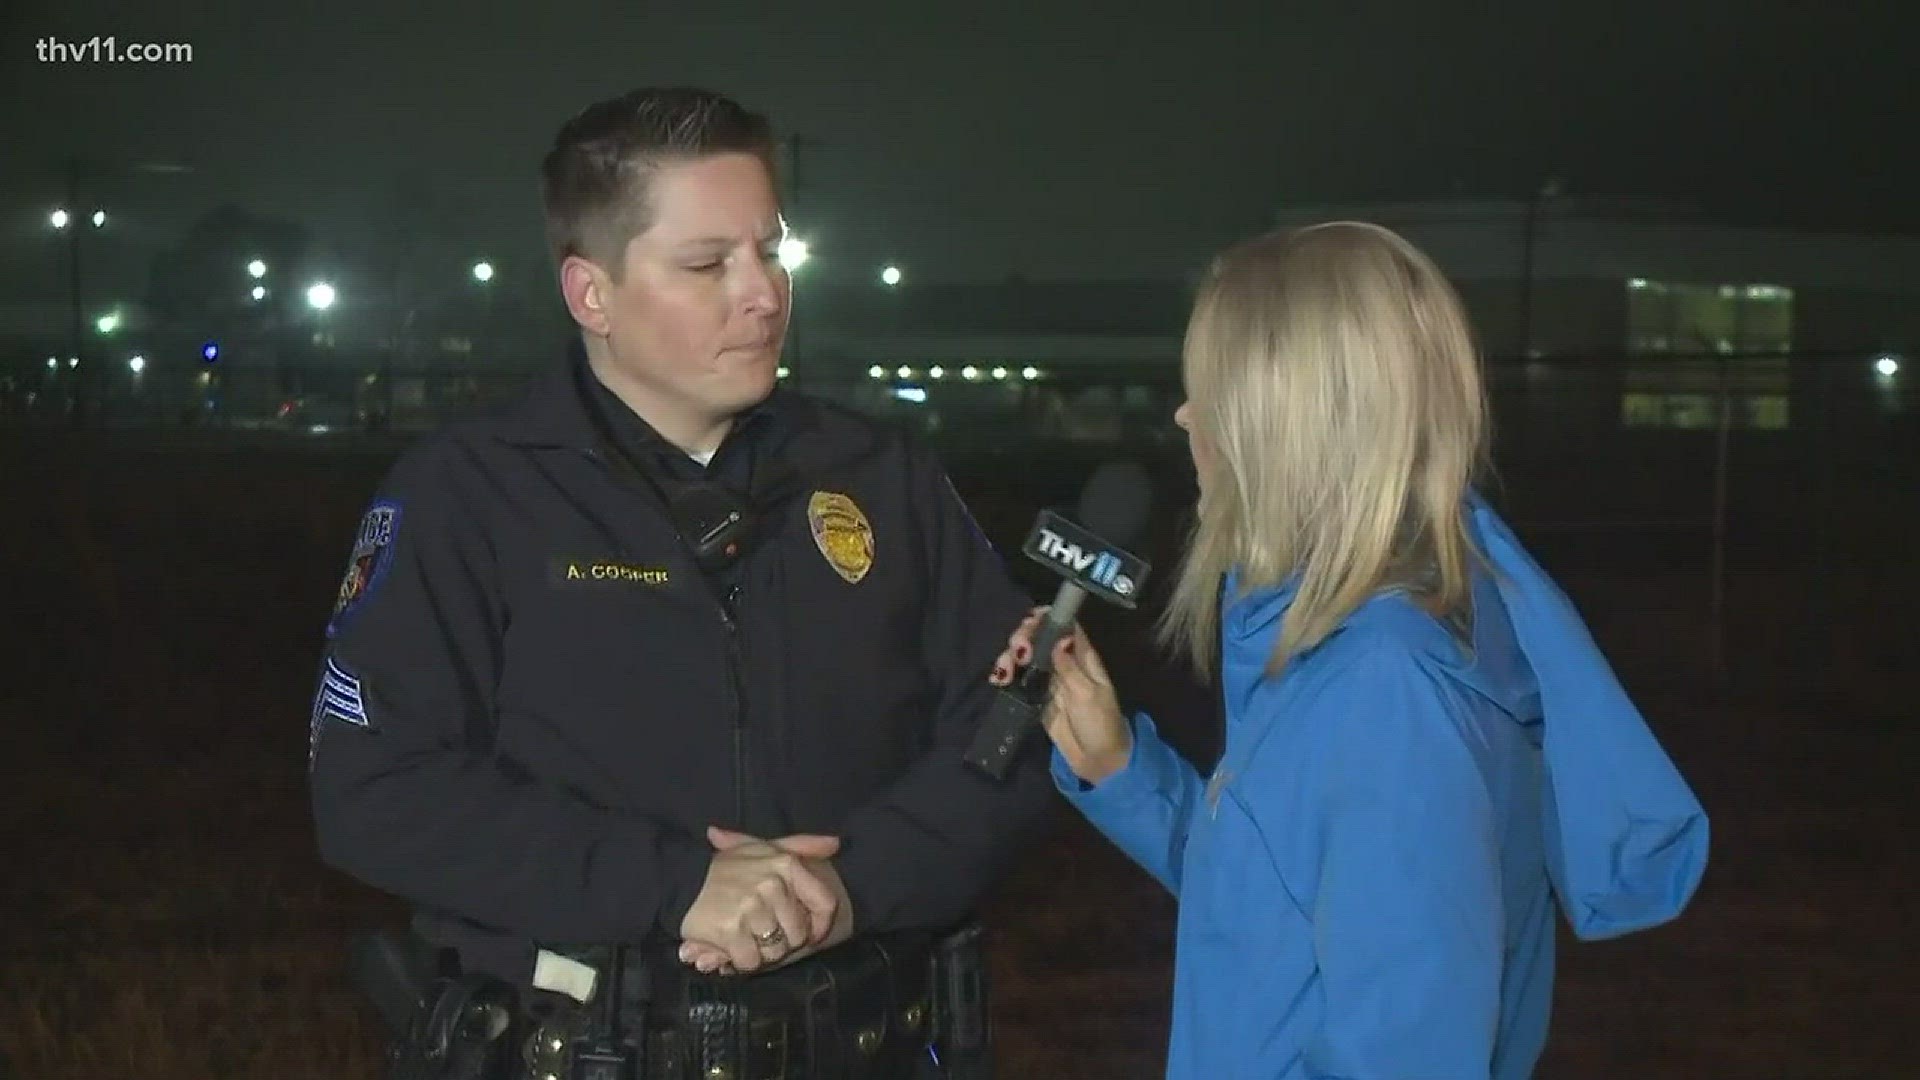 Police are investigating a double fatal shooting outside the Maybelline factory in North Little Rock. THV11's Amanda Jaeger was live on the scene Wednesday morning